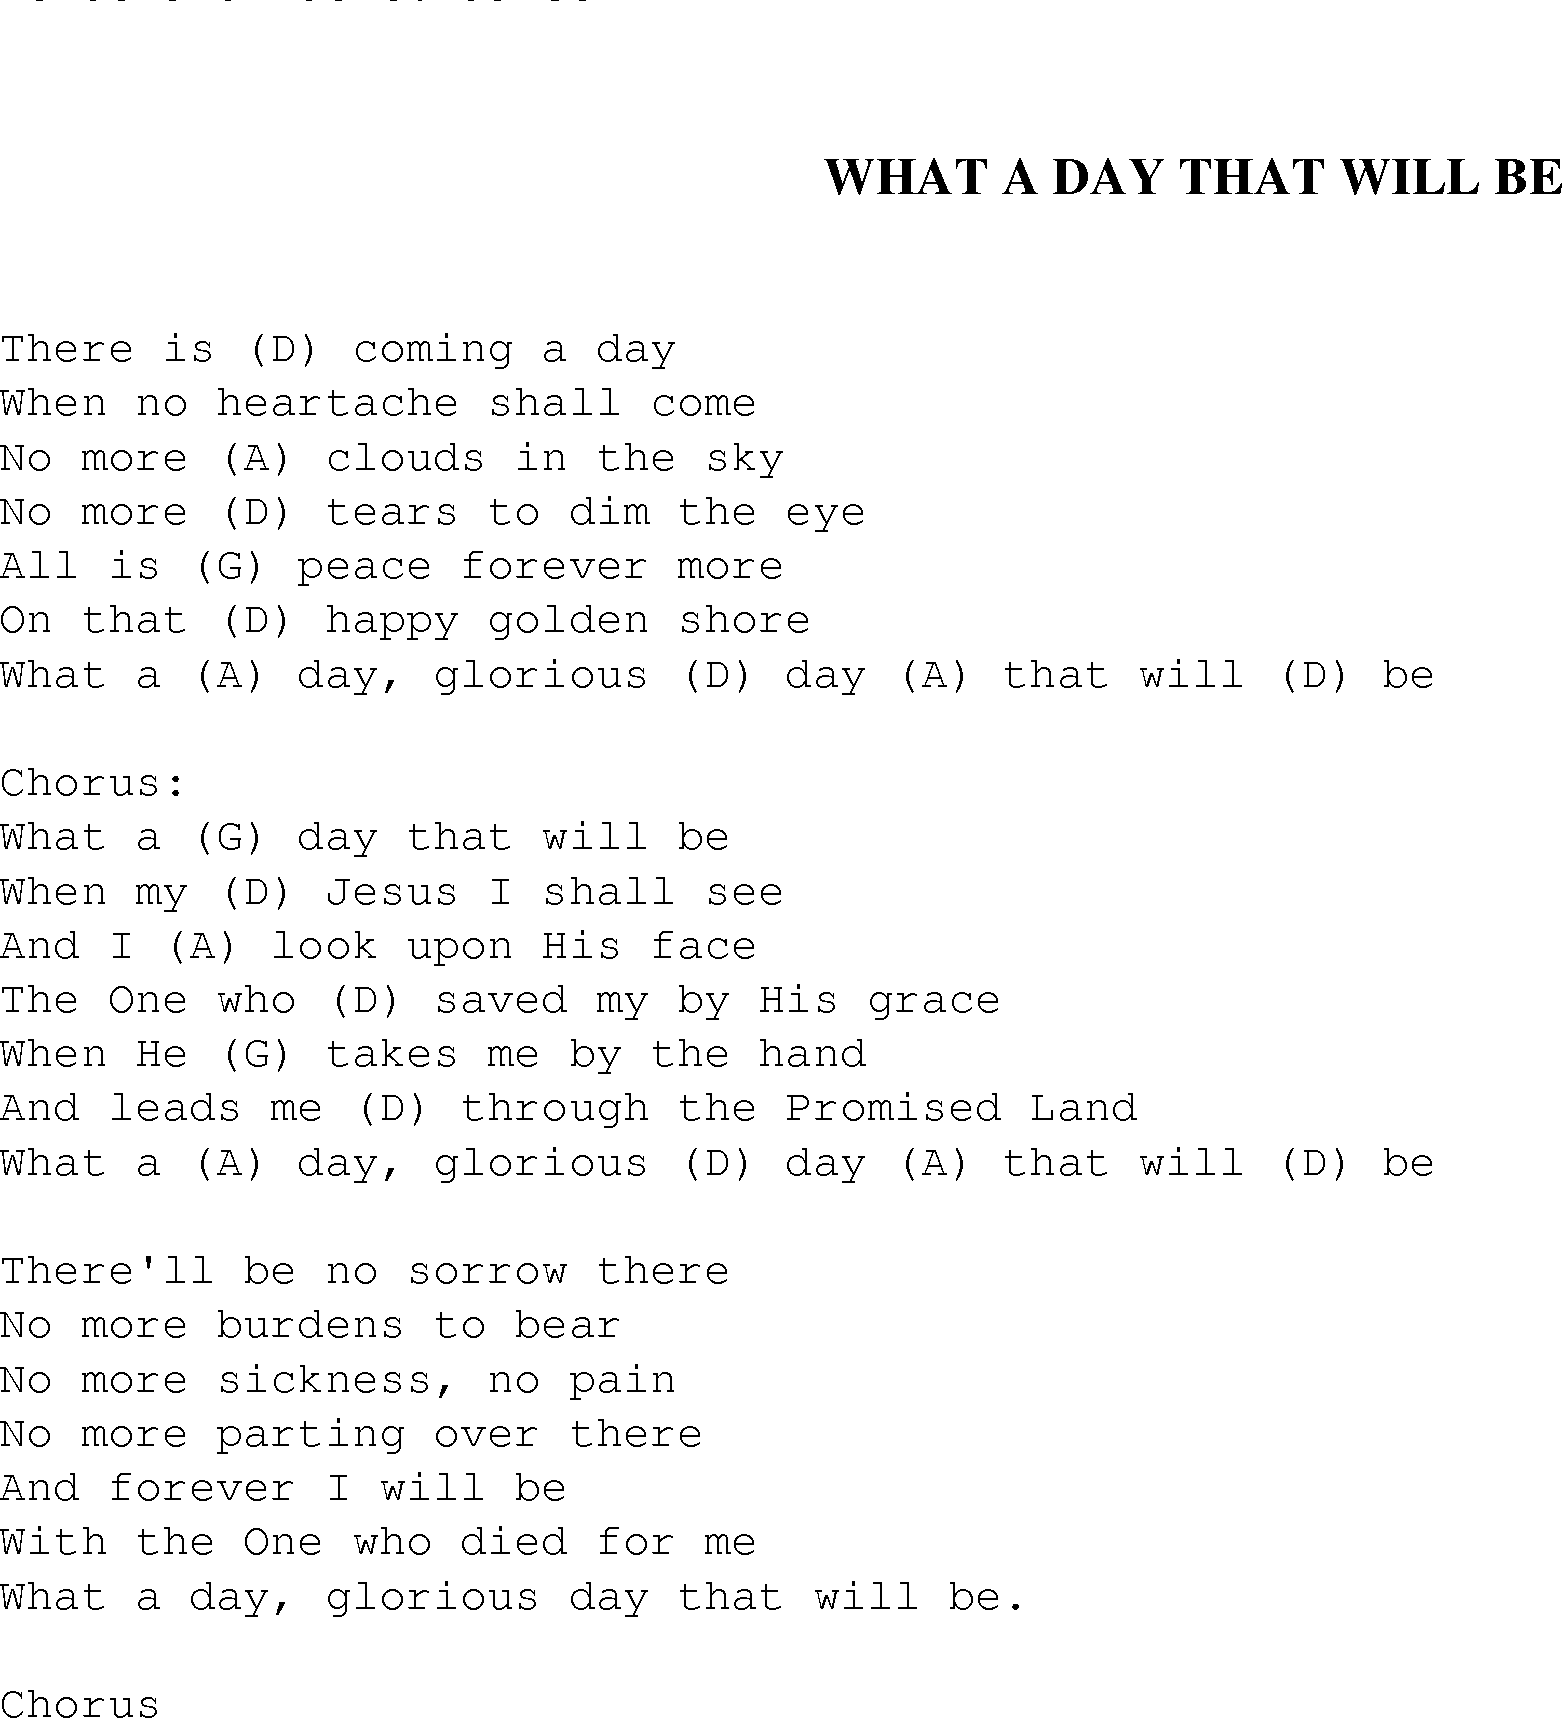 Gospel Song: what_a_day_that_will_be, lyrics and chords.